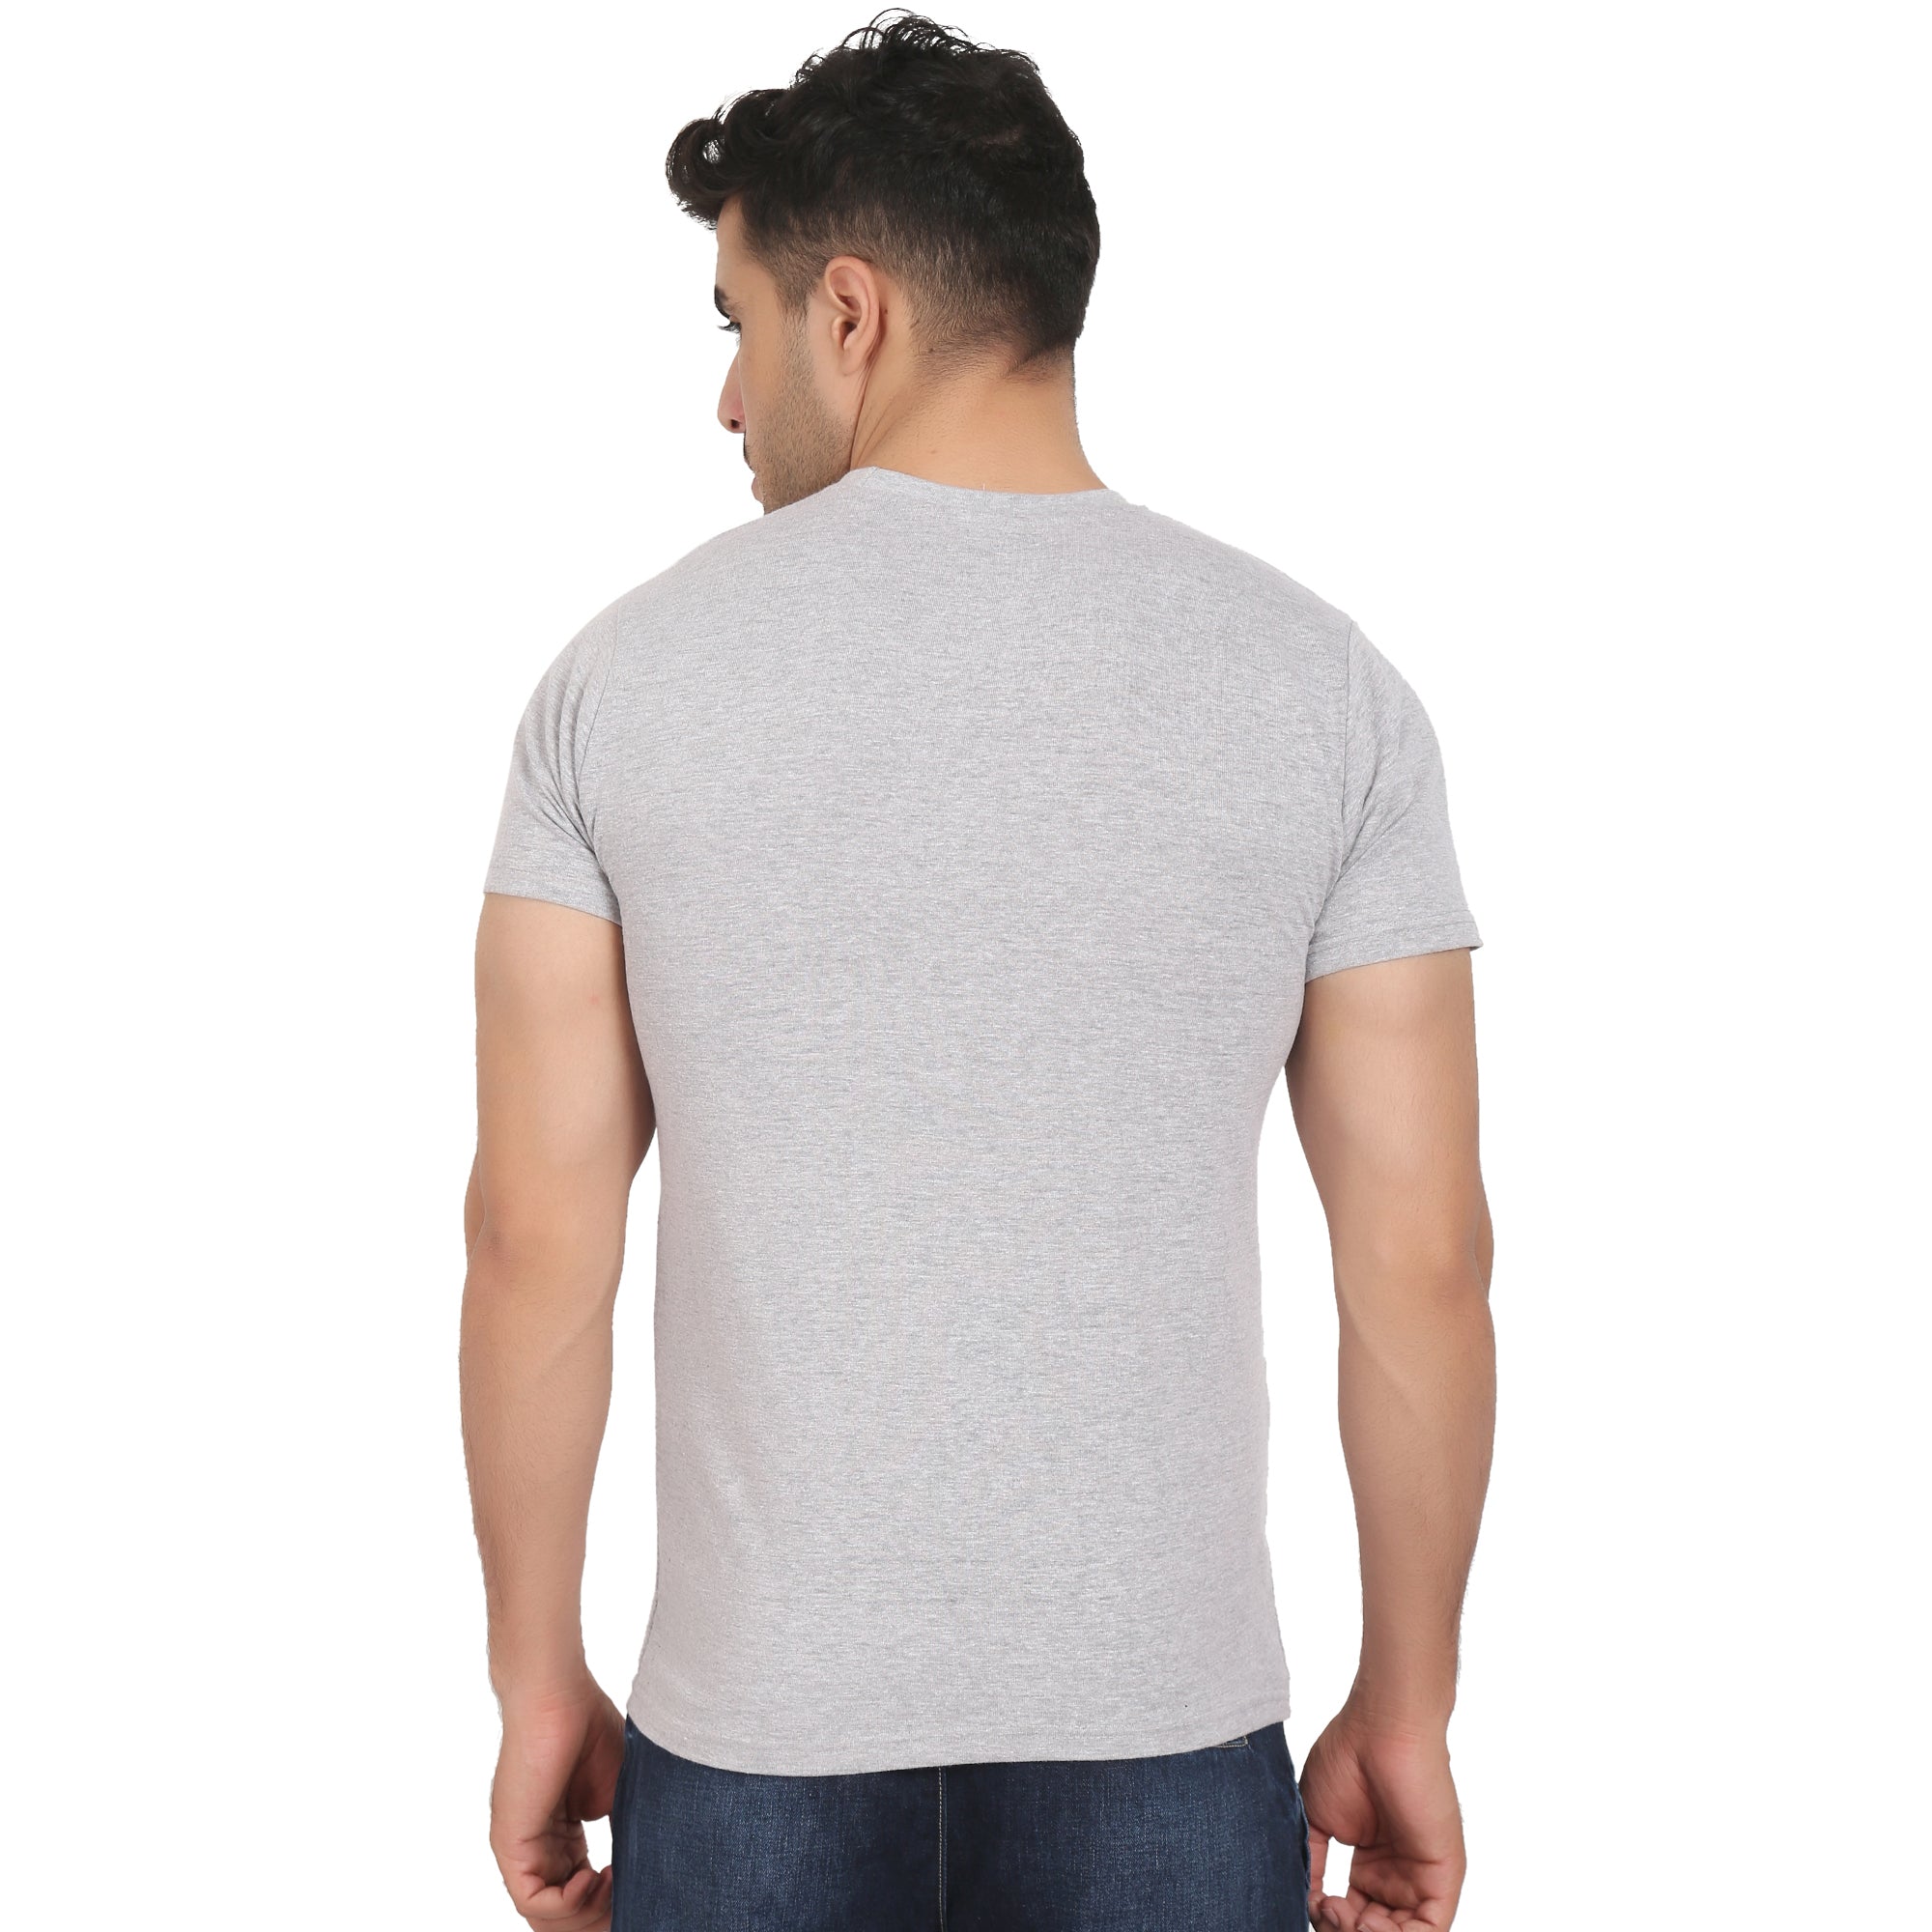 Combo Offer - Men Crew Neck Cotton T-Shirts - Half Sleeves - 3 Colors - Navy Blue, Blue & Grey